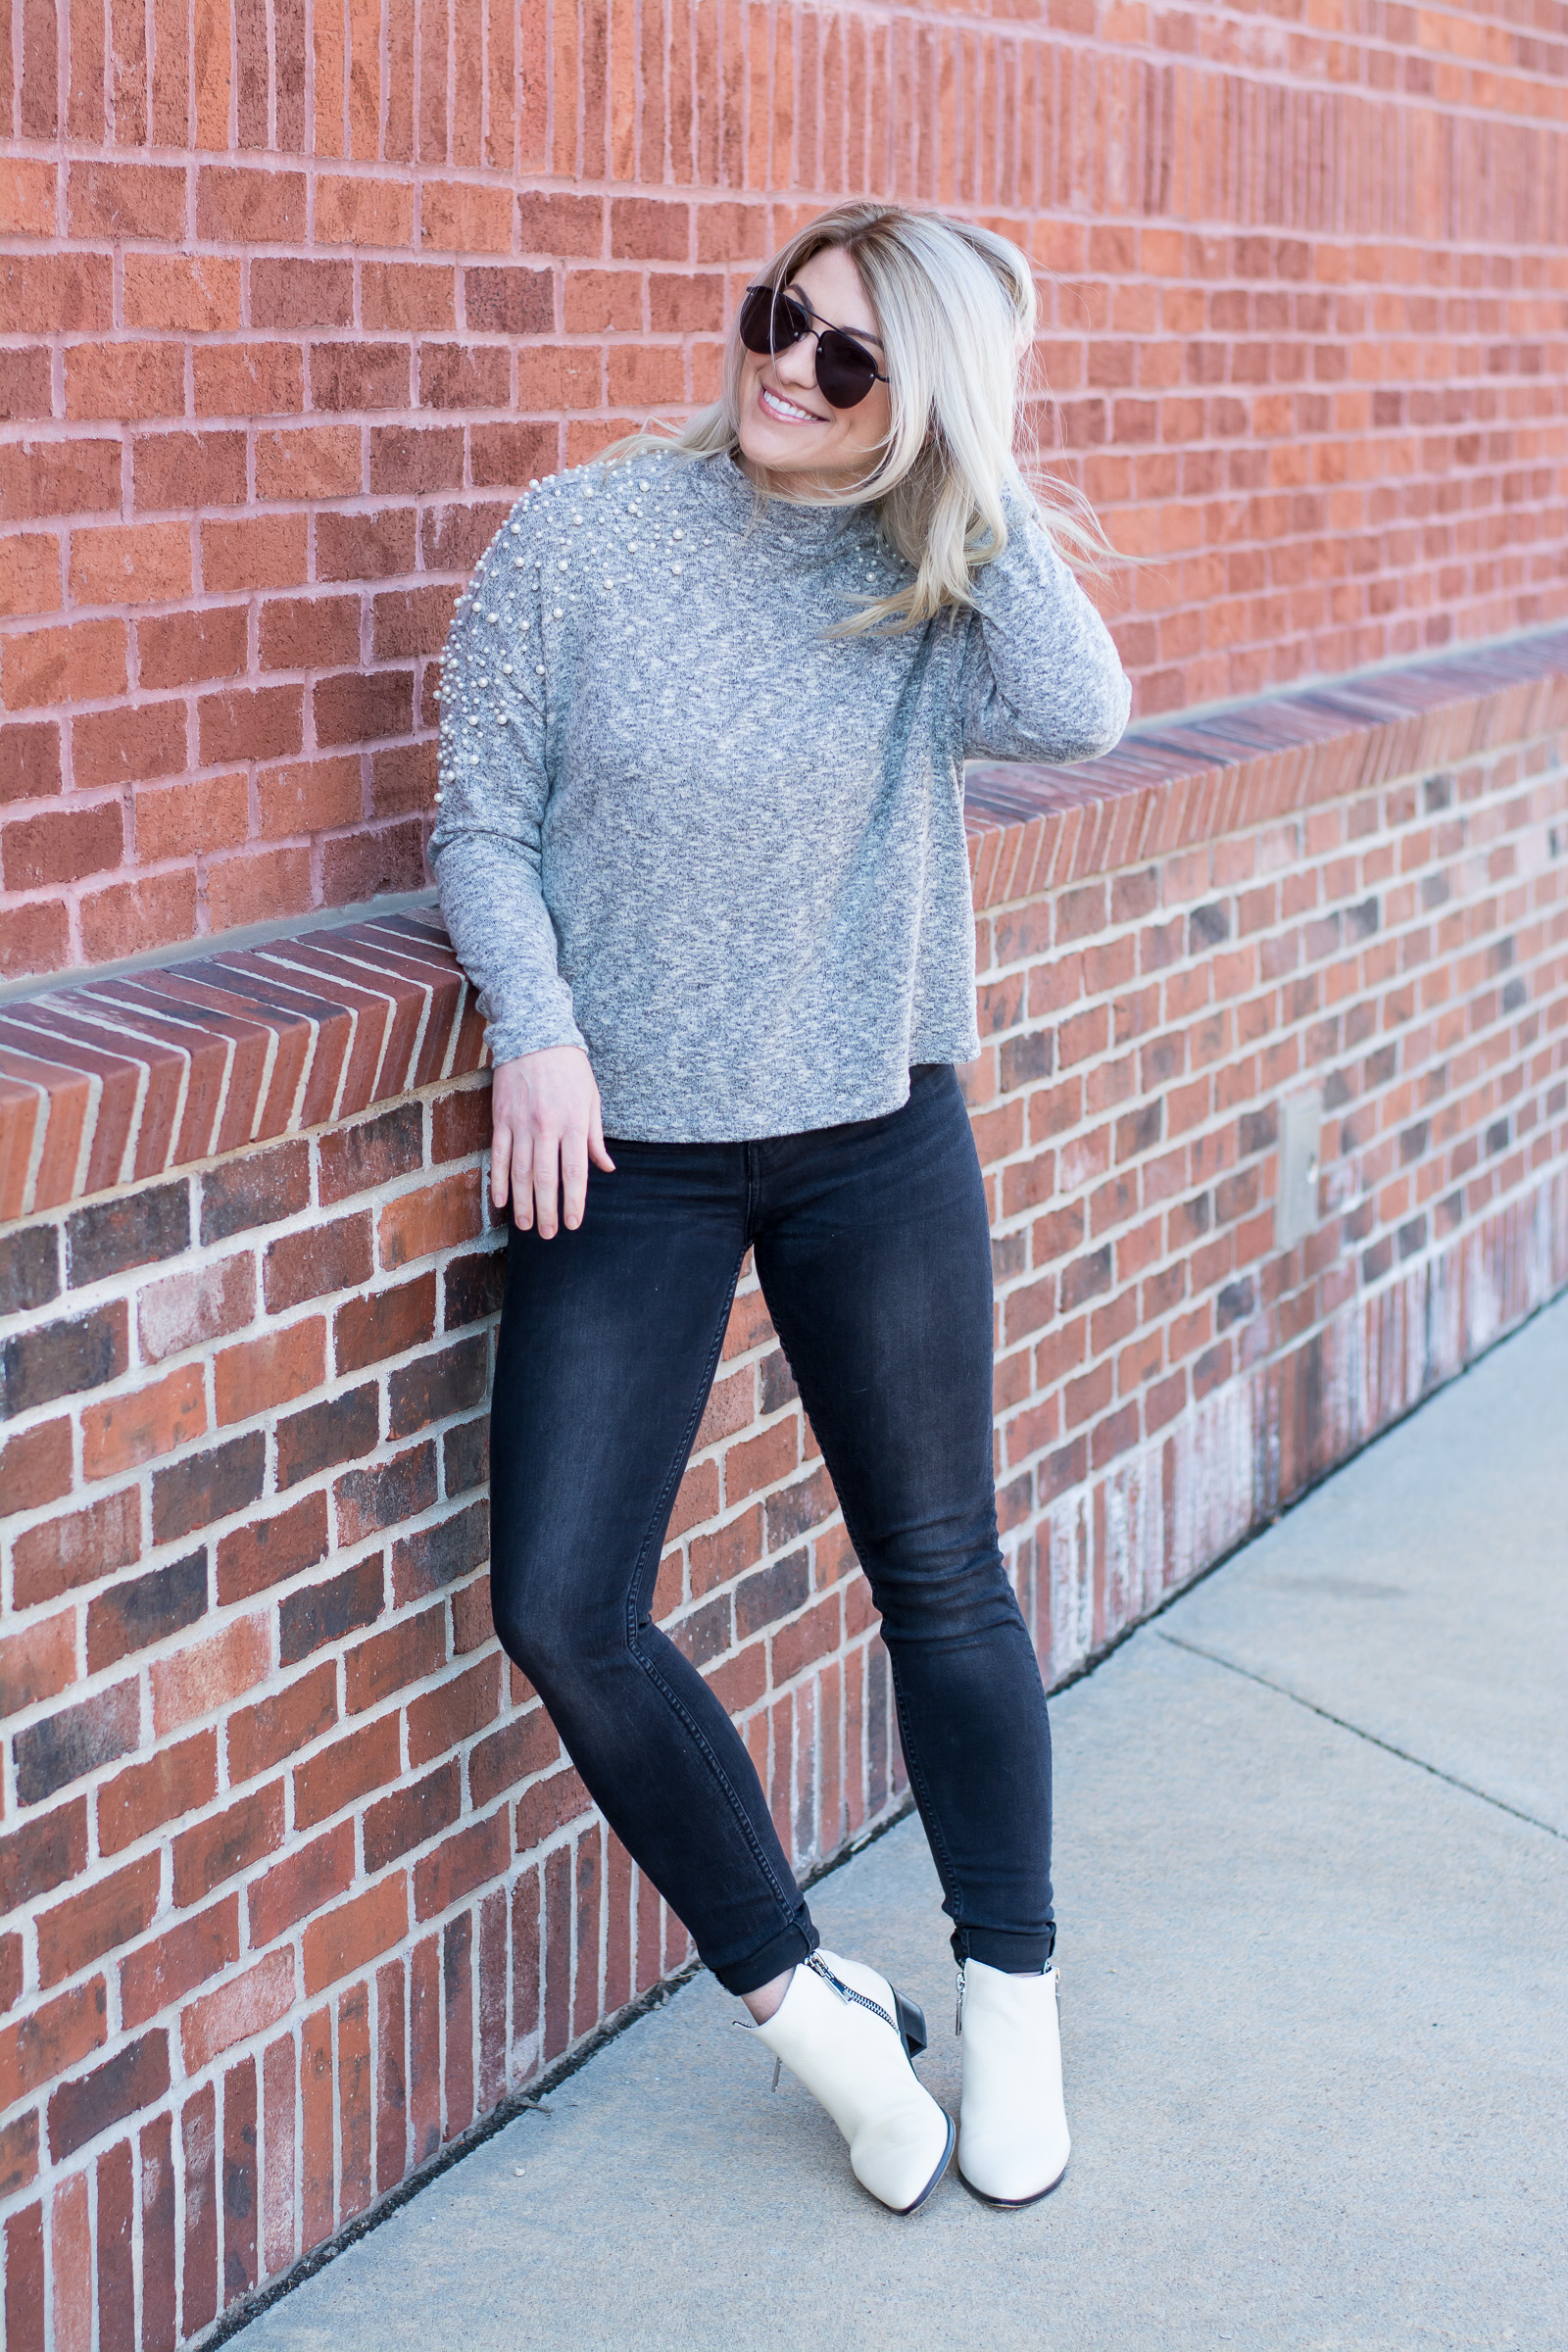 Pearl Sweater with White Booties. | Ashley from LSR